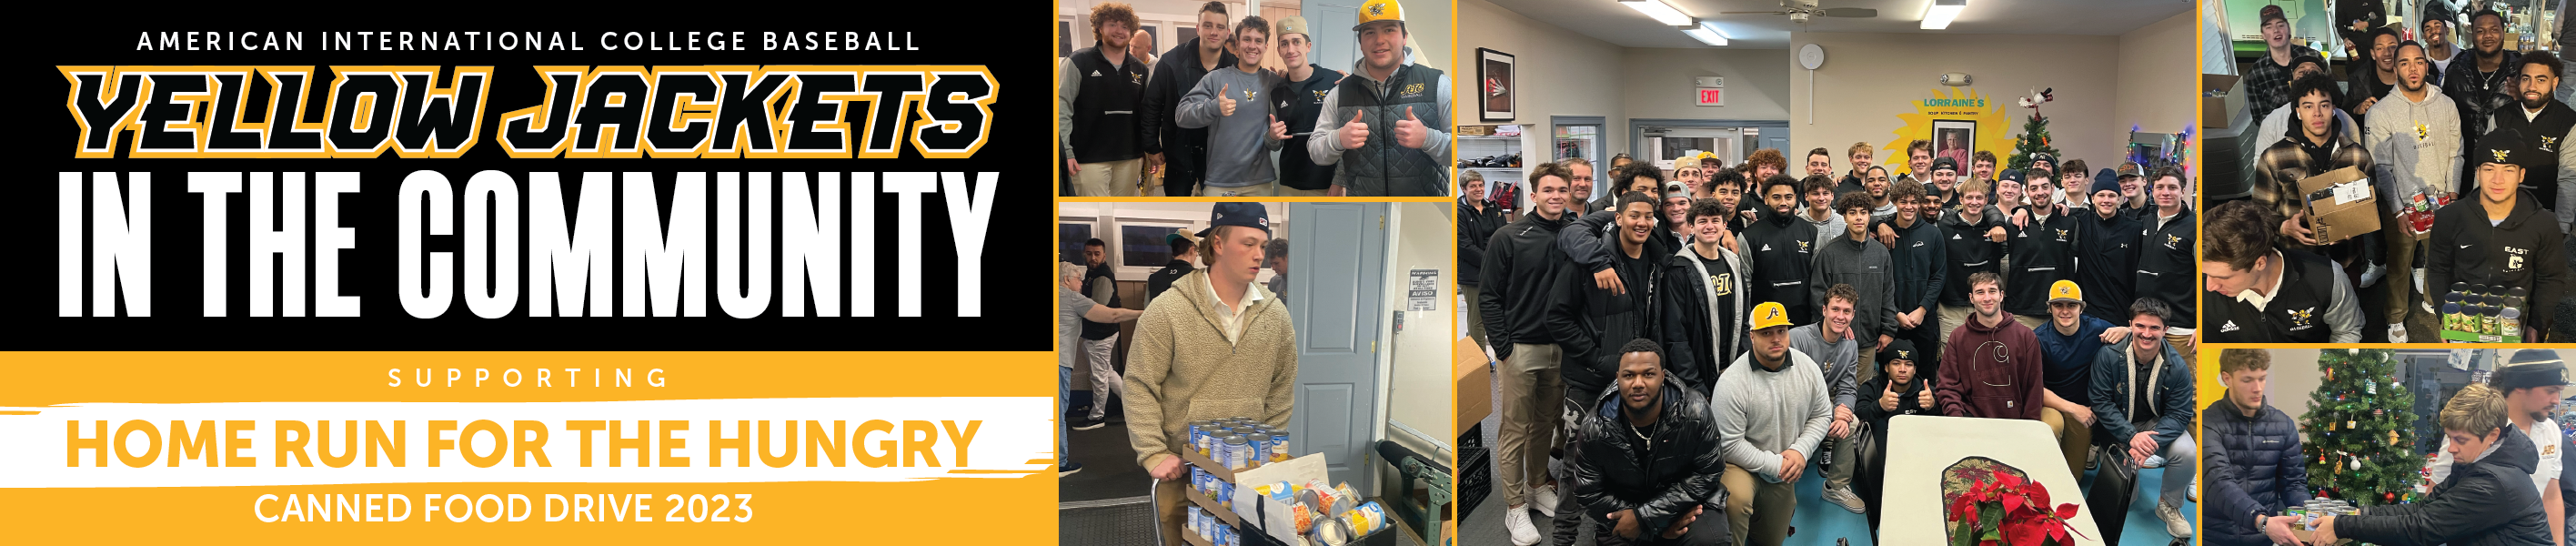 AIC Baseball's Home Run for the Hungry